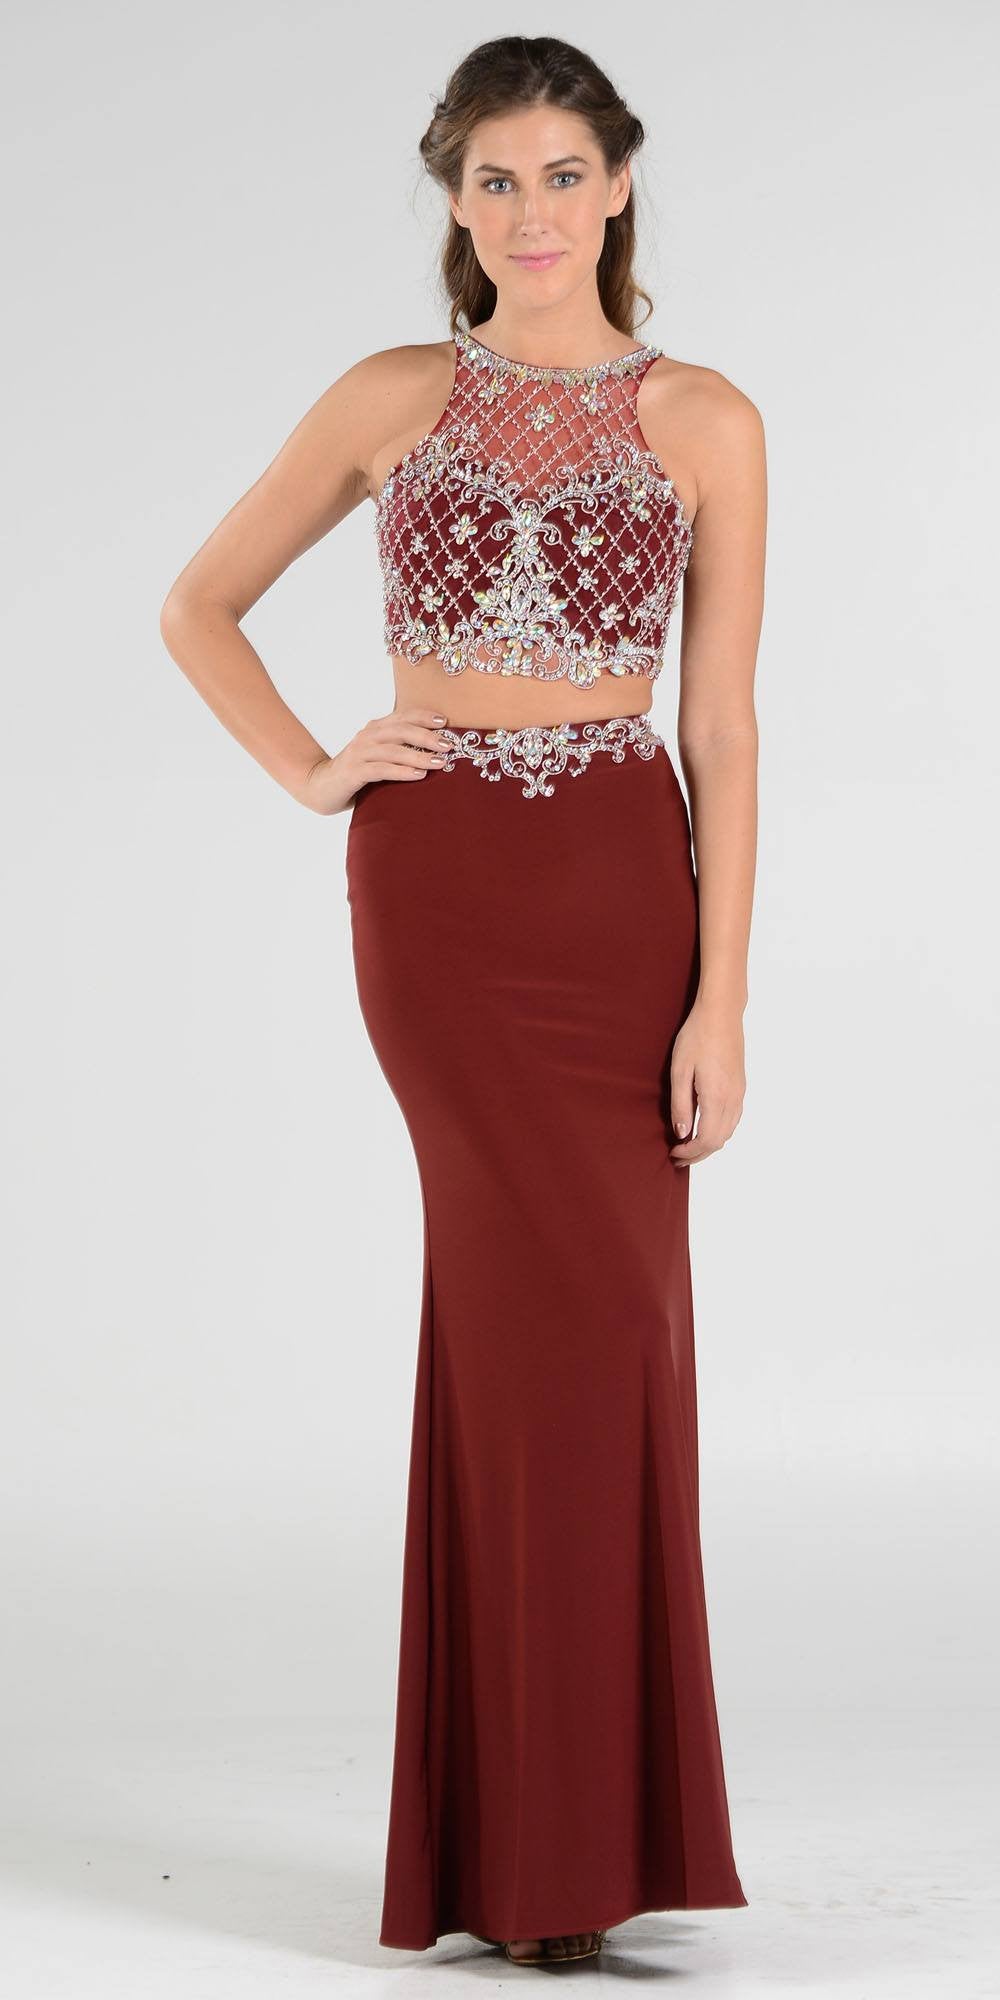 Two-Piece Burgundy Prom Gown with Embellished Crop Top and ITY Skirt